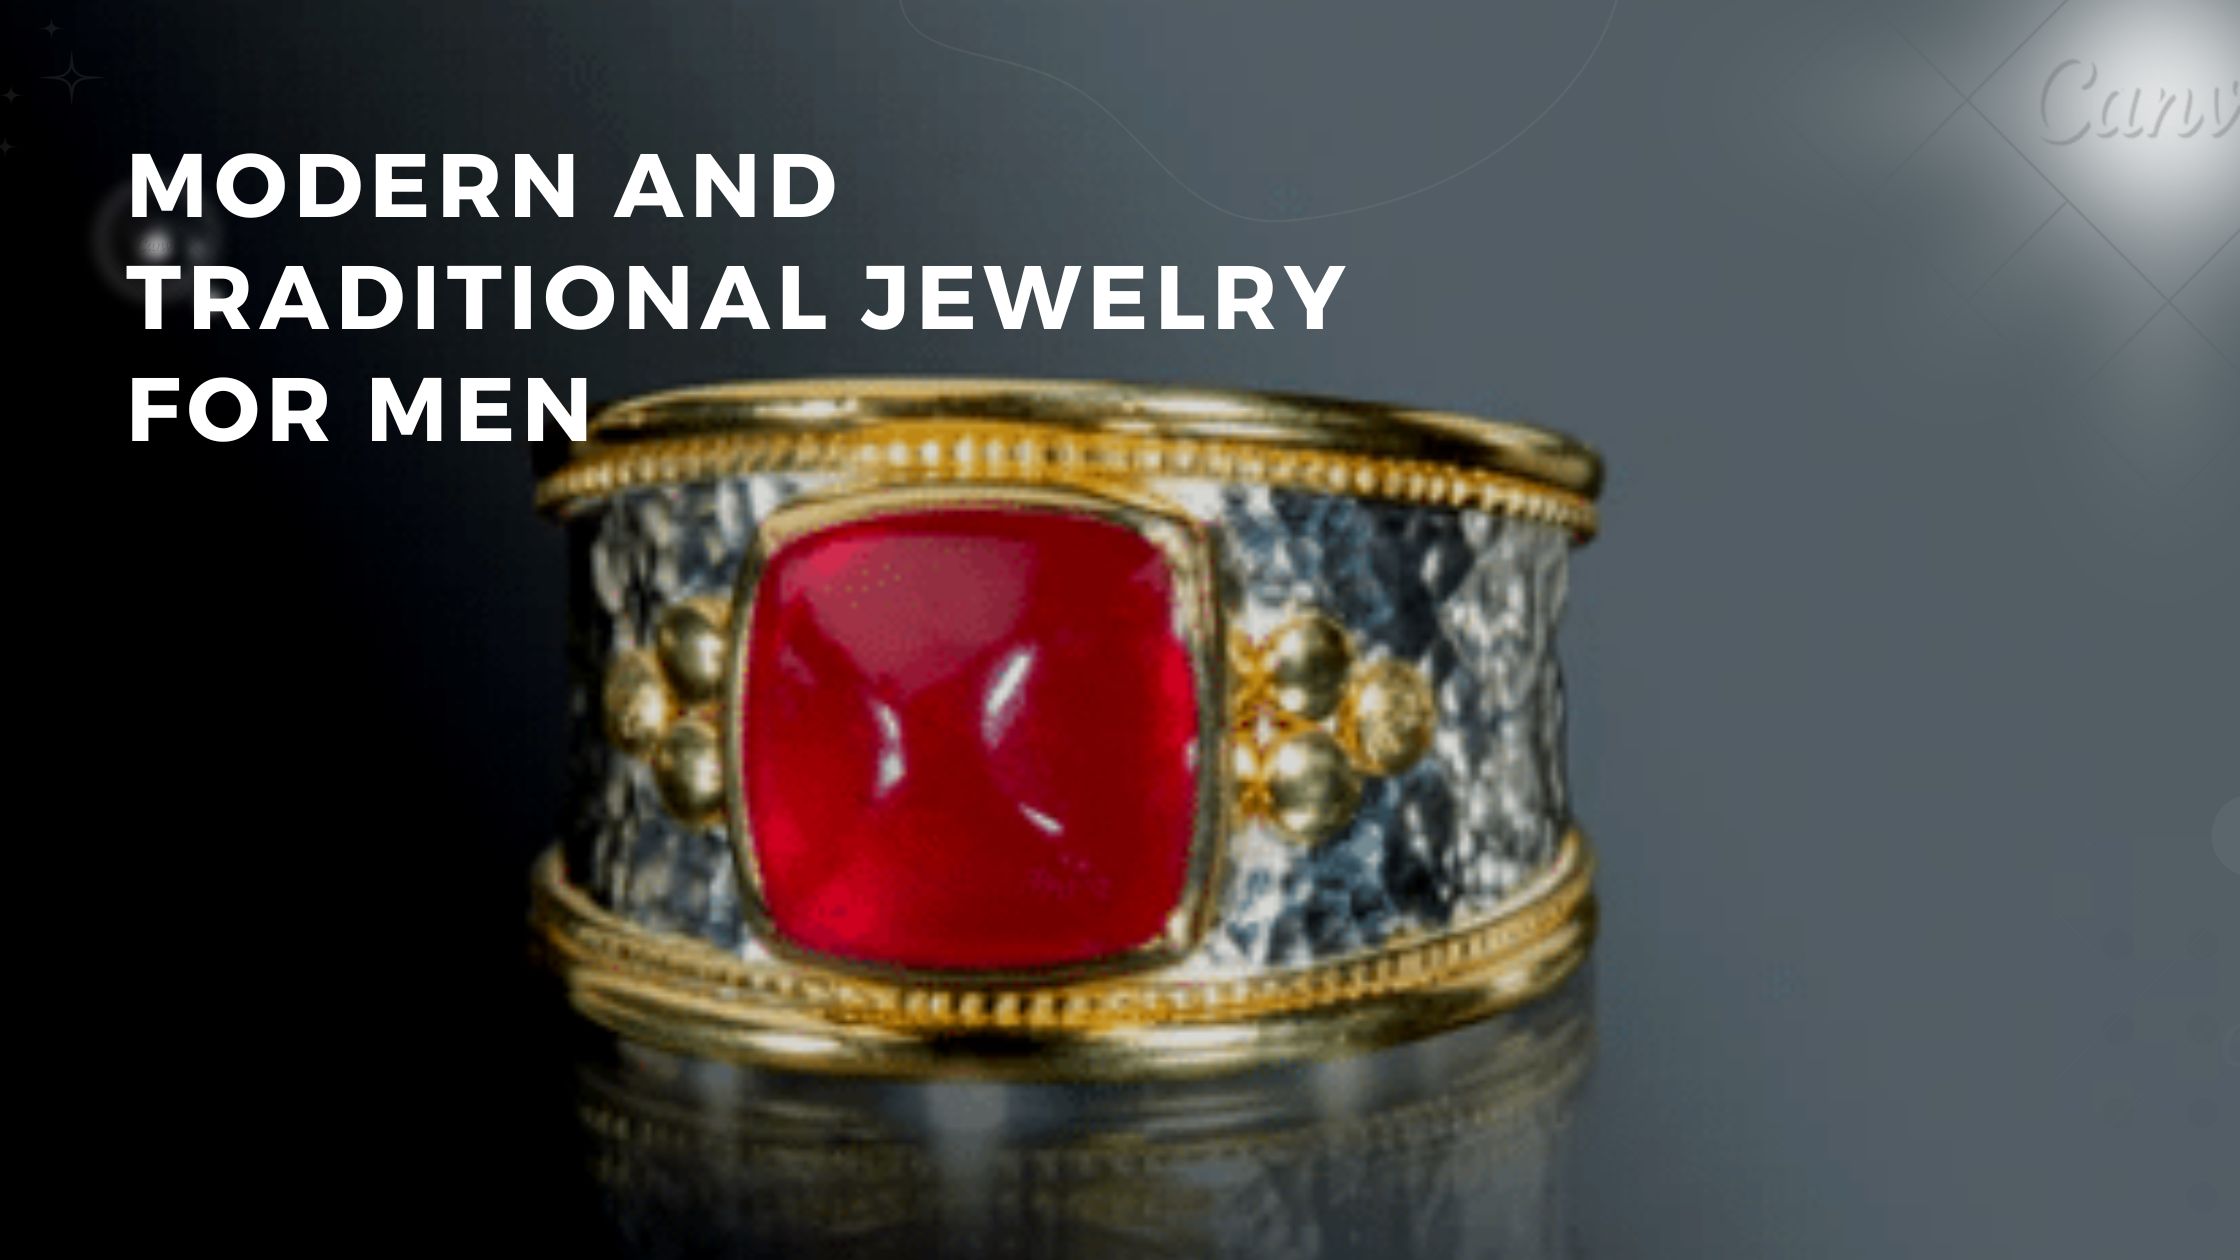 Everything About Modern and Traditional Jewelry For Men